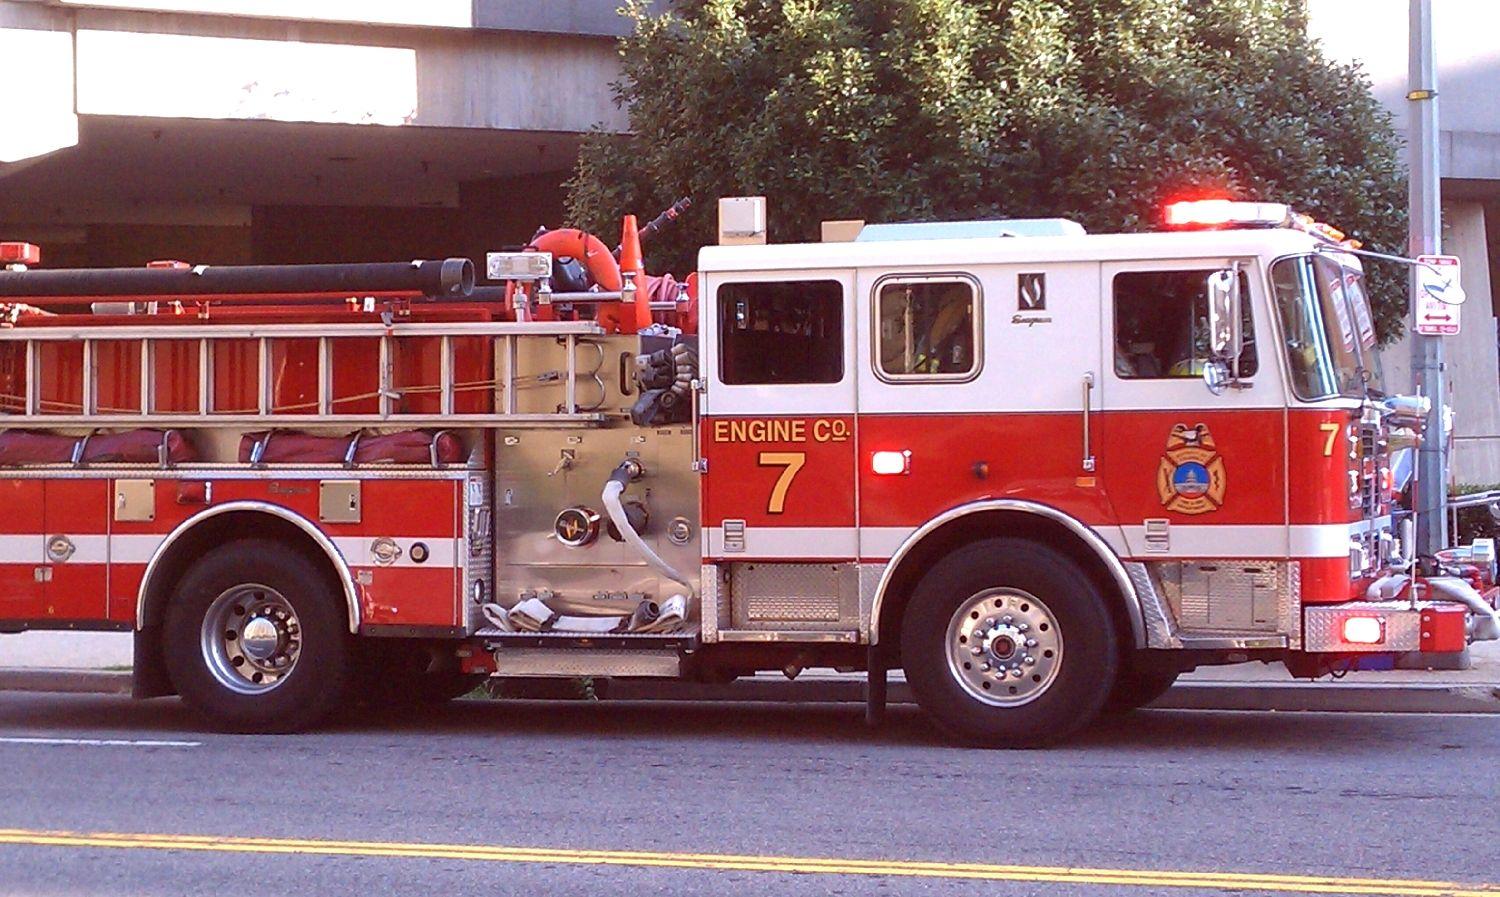 Why are Firetrucks Red?